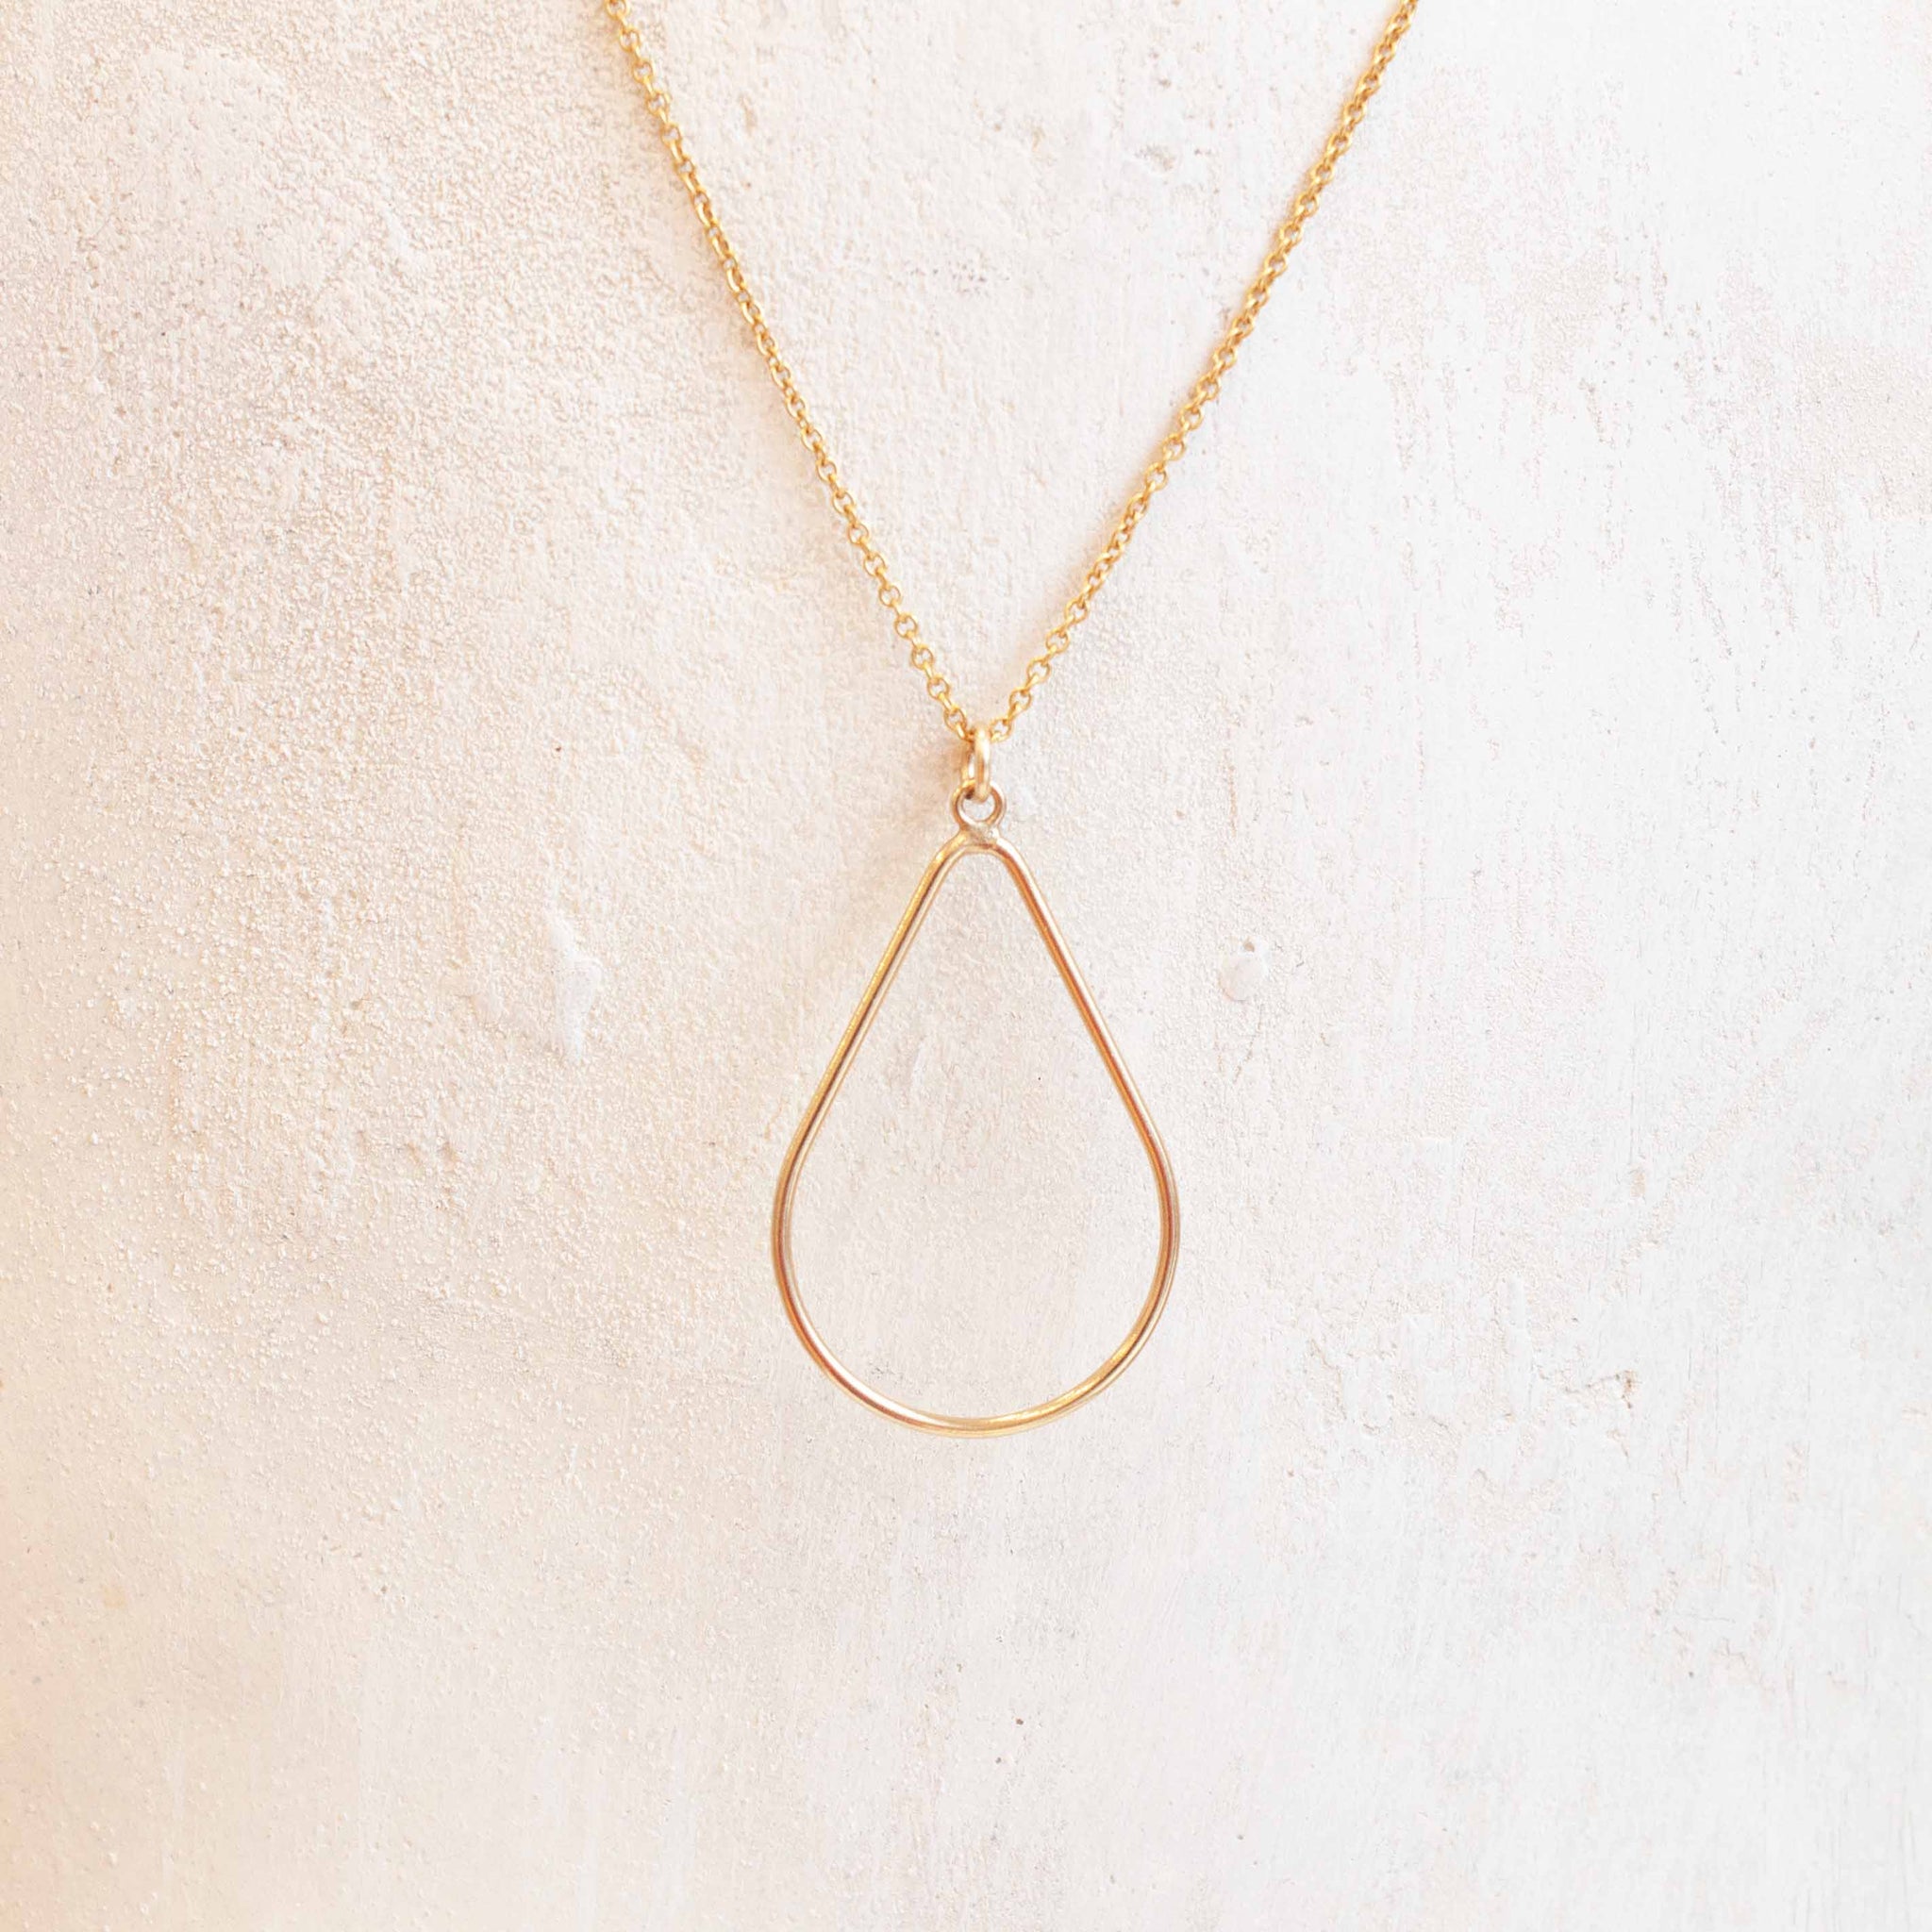 A modern shape to freshen up your everyday necklace! 16, 18 or 20 inch gold filled necklace with 1 1/4 inch gold filled teardrop pendant. Handmade in Toronto by kp jewelry co.